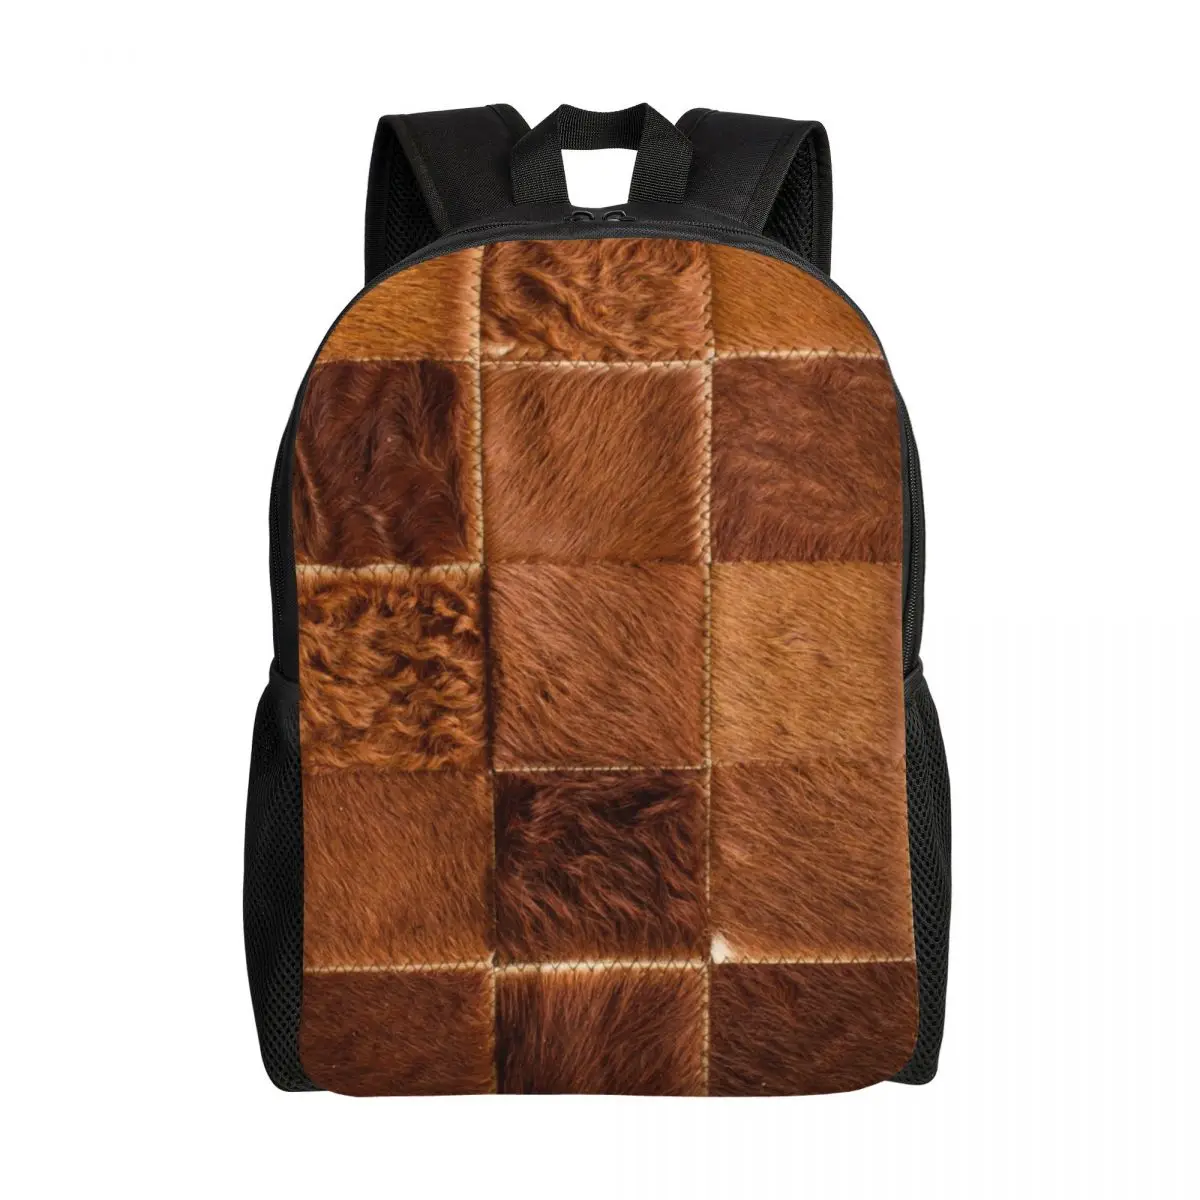 

Brown Checkered Cowhide Patche Backpack School College Students Bookbag Fits 15 Inch Laptop Cow Fur Leather Texture Bags